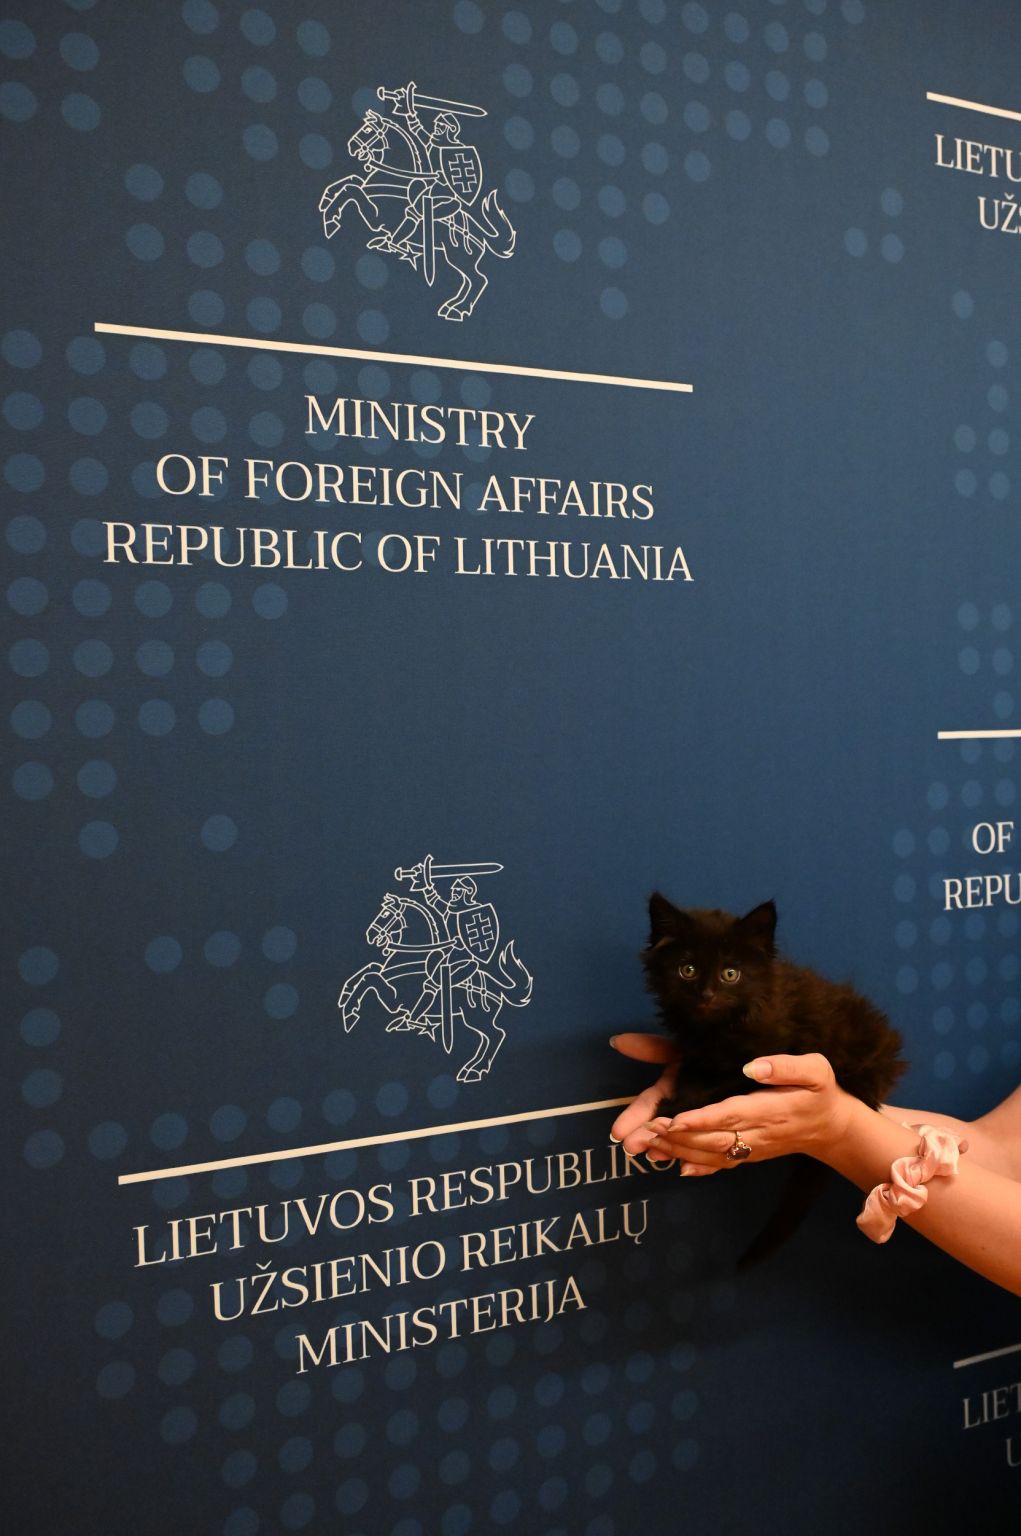 Rango, a tiny black kitten who is the new chief mouser of the ministry of foreign affairs in Lithuania